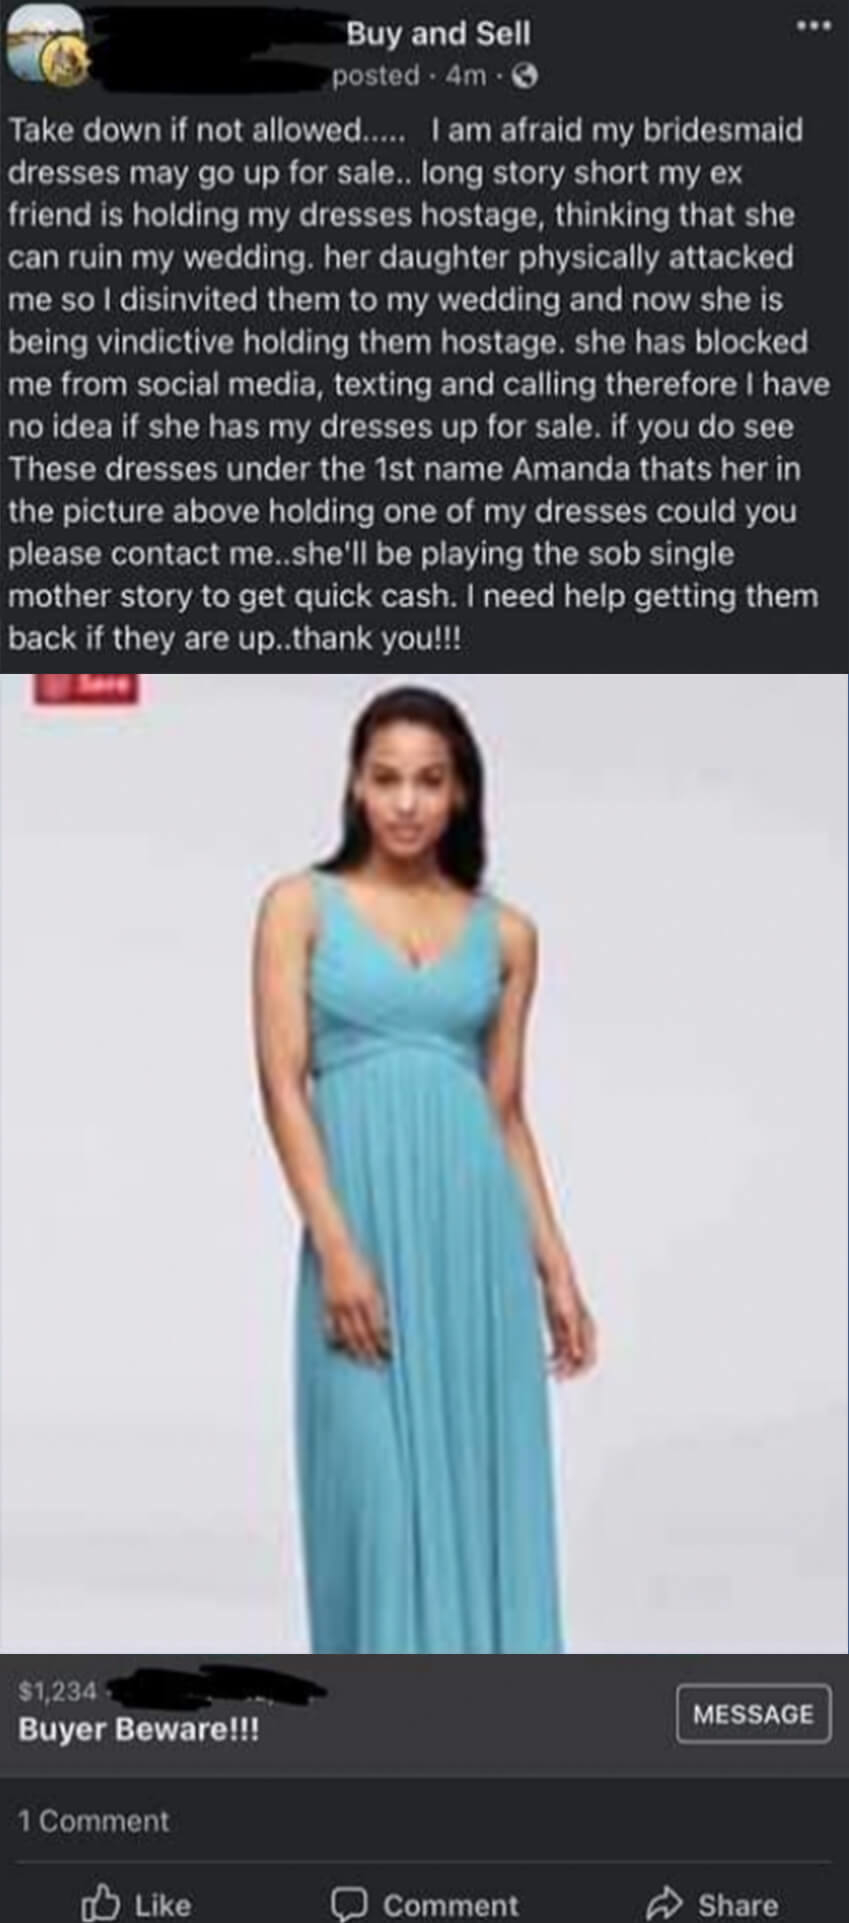 post saying former bridesmaid is holding all the bridesmaid dresses hostage and trying to sell them in an attempt to sabotage the wedding, so don&#x27;t buy from her